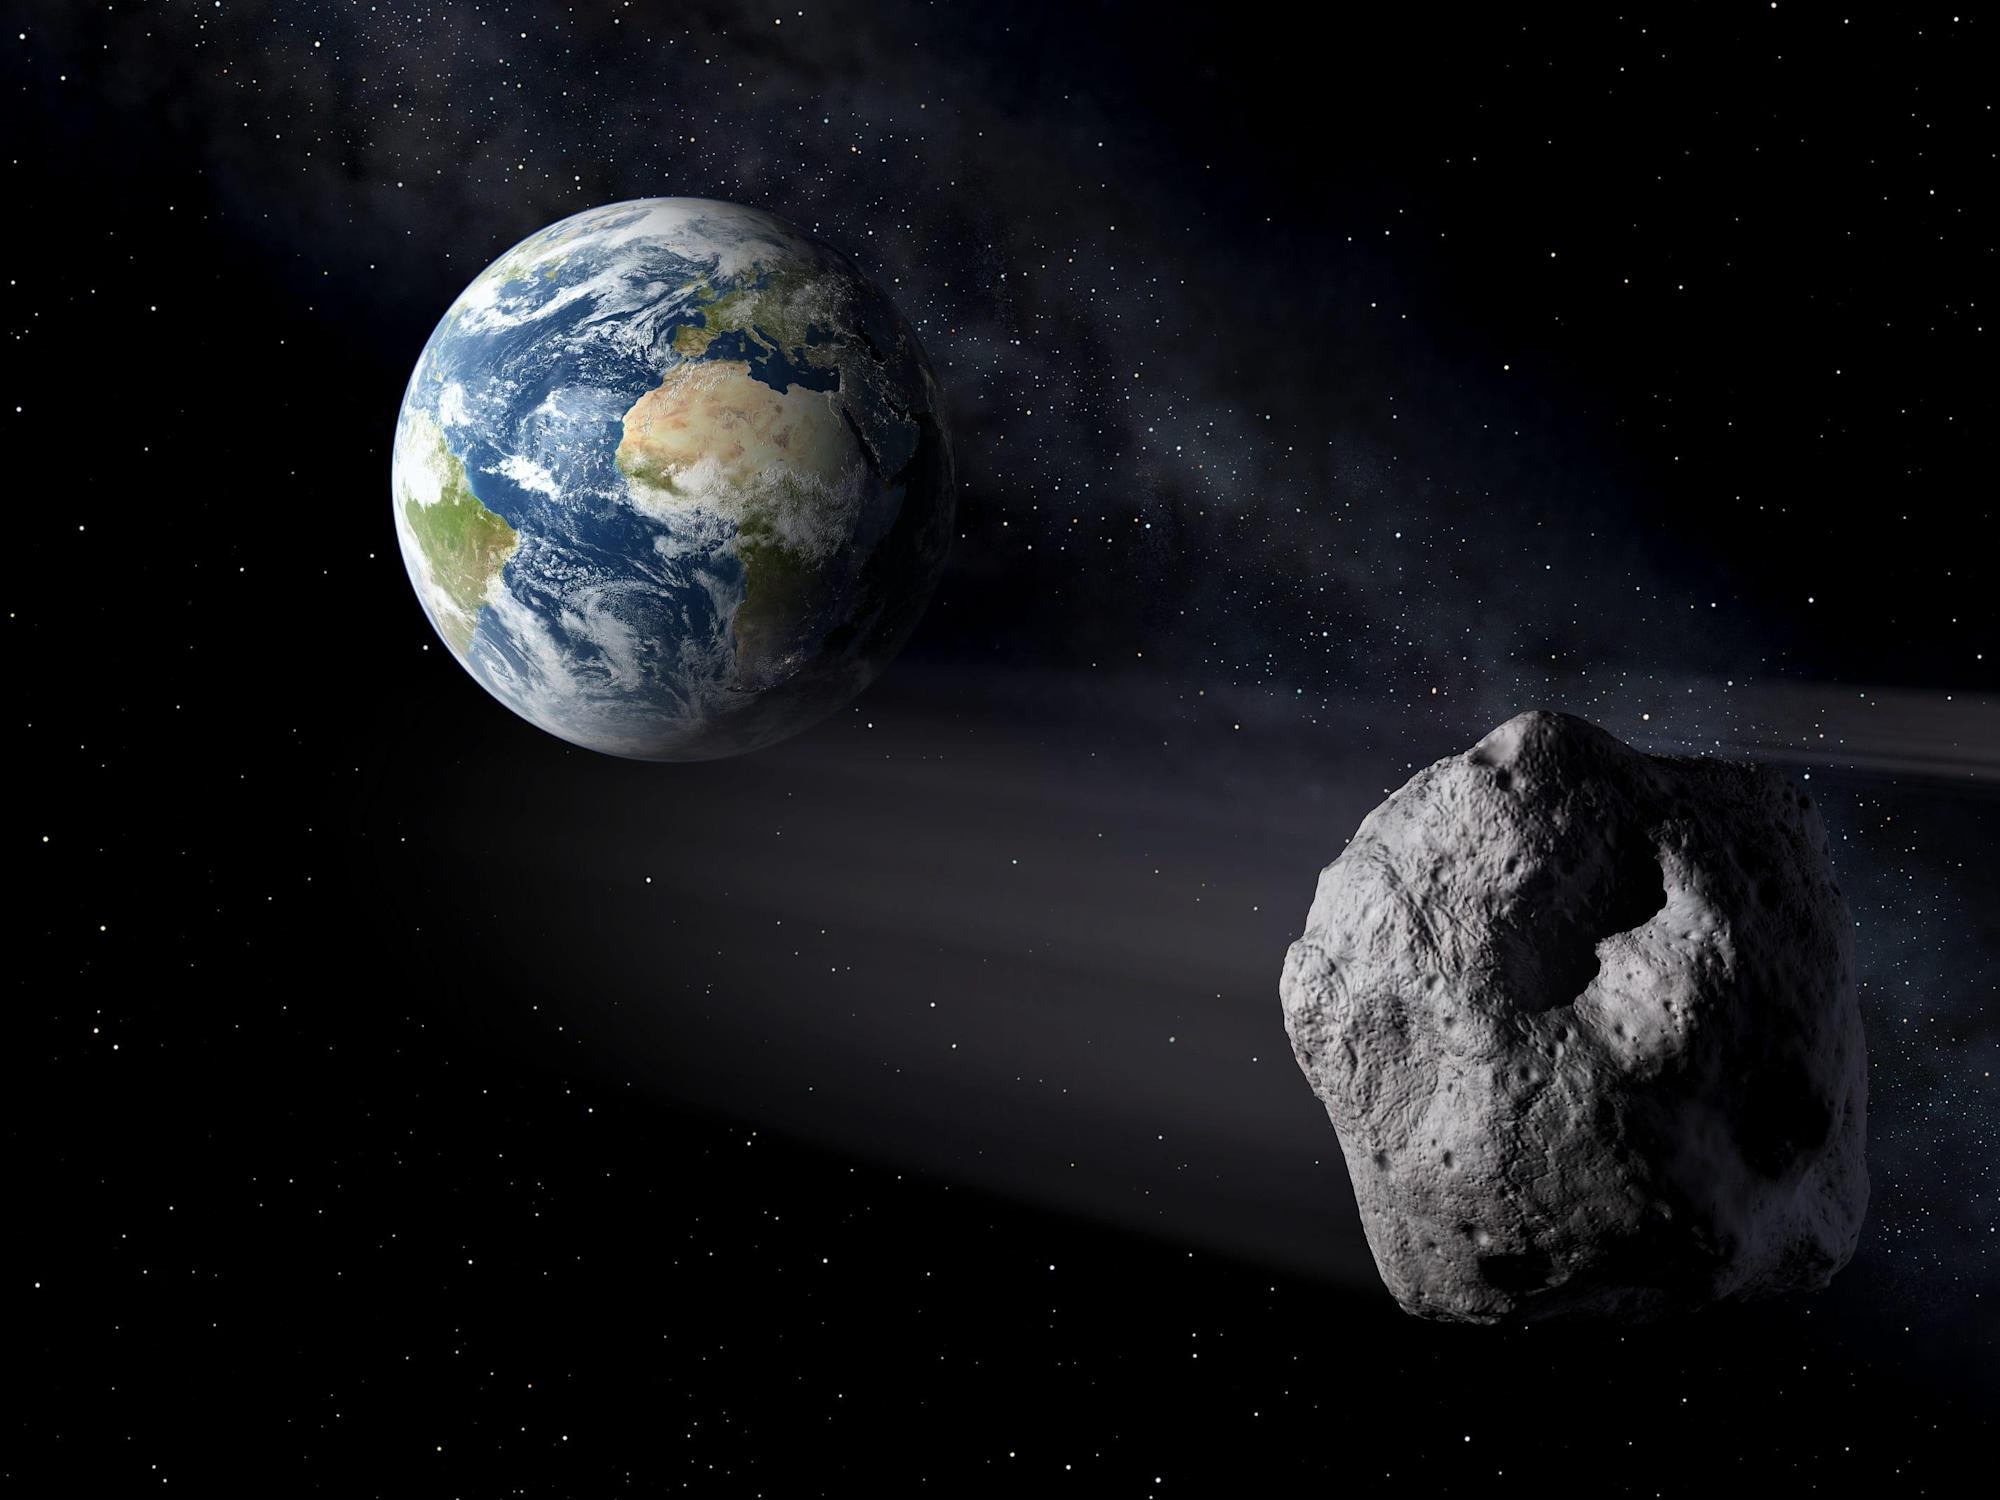 NASA says a 'potentially hazardous' asteroid, which could be bigger than the Eiffel Tower, will shoot past Earth next week